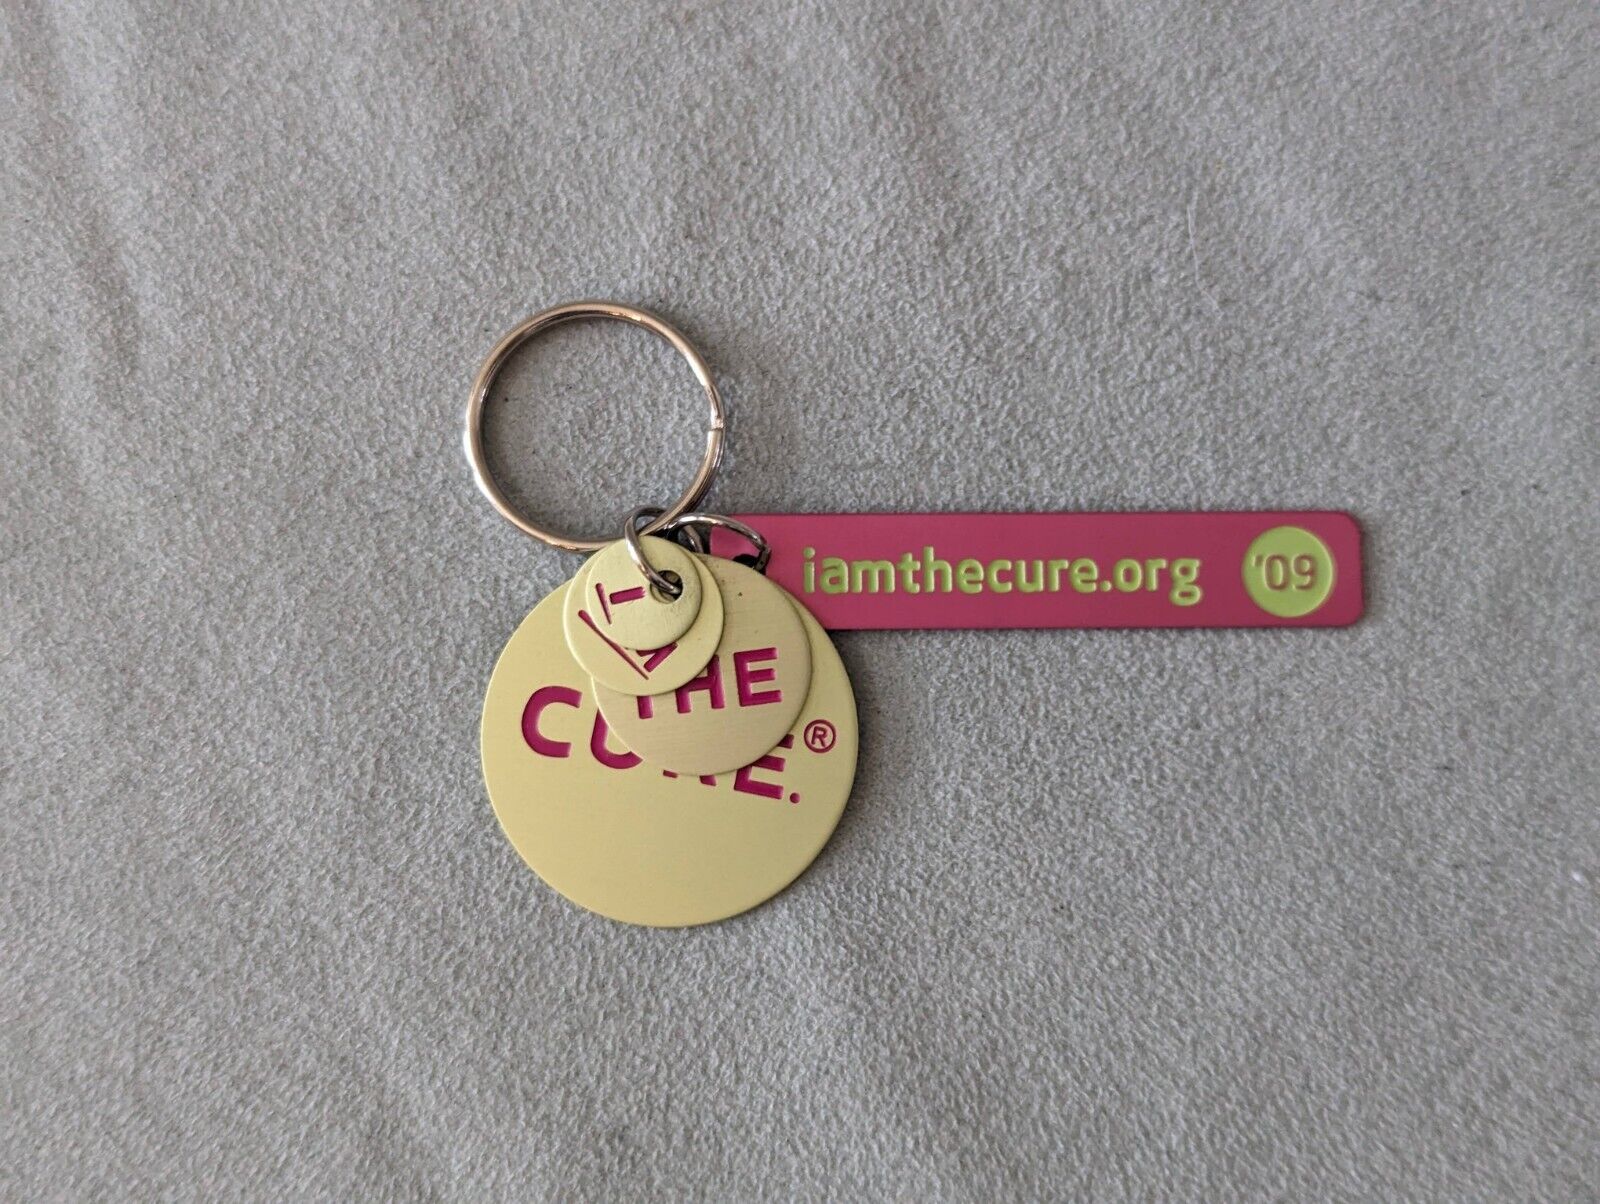 I Am The Cure 2009 Breast Cancer Awareness Keychain Keyring Metal Round Shapes